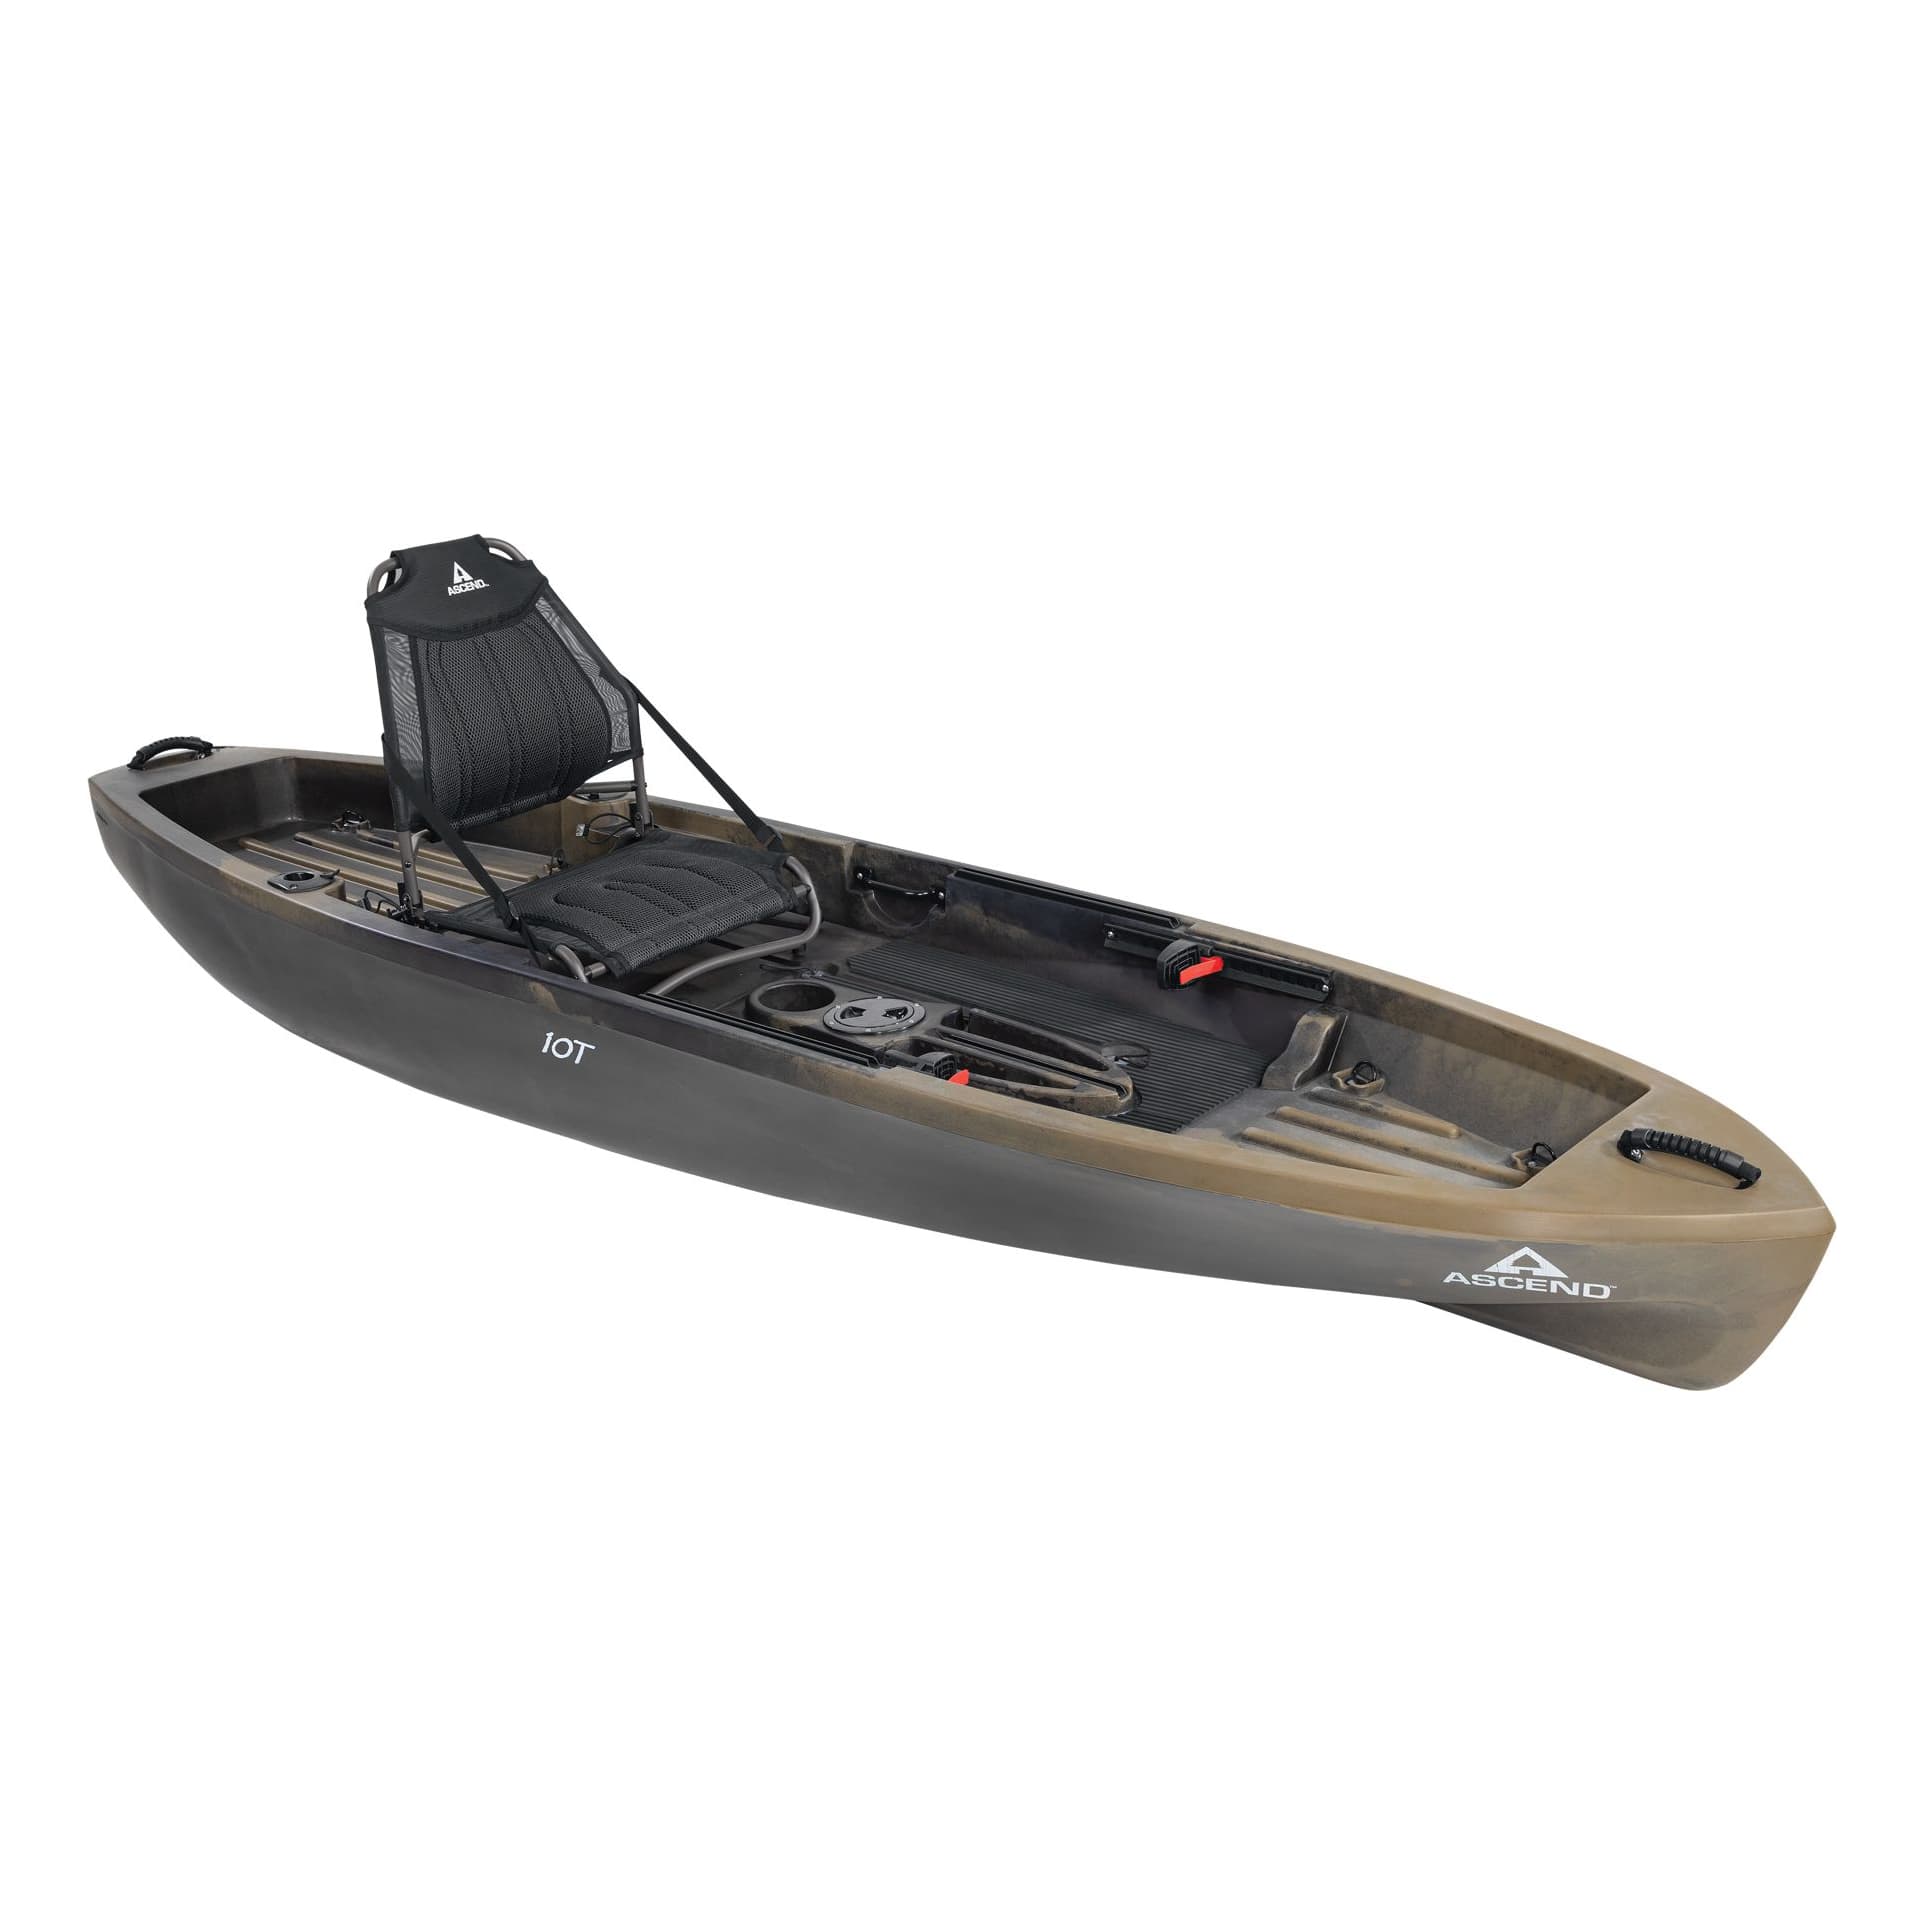 Ascend® 10T Sit-On-Top Kayak with Enhanced Seating System  - Camo - Angle View